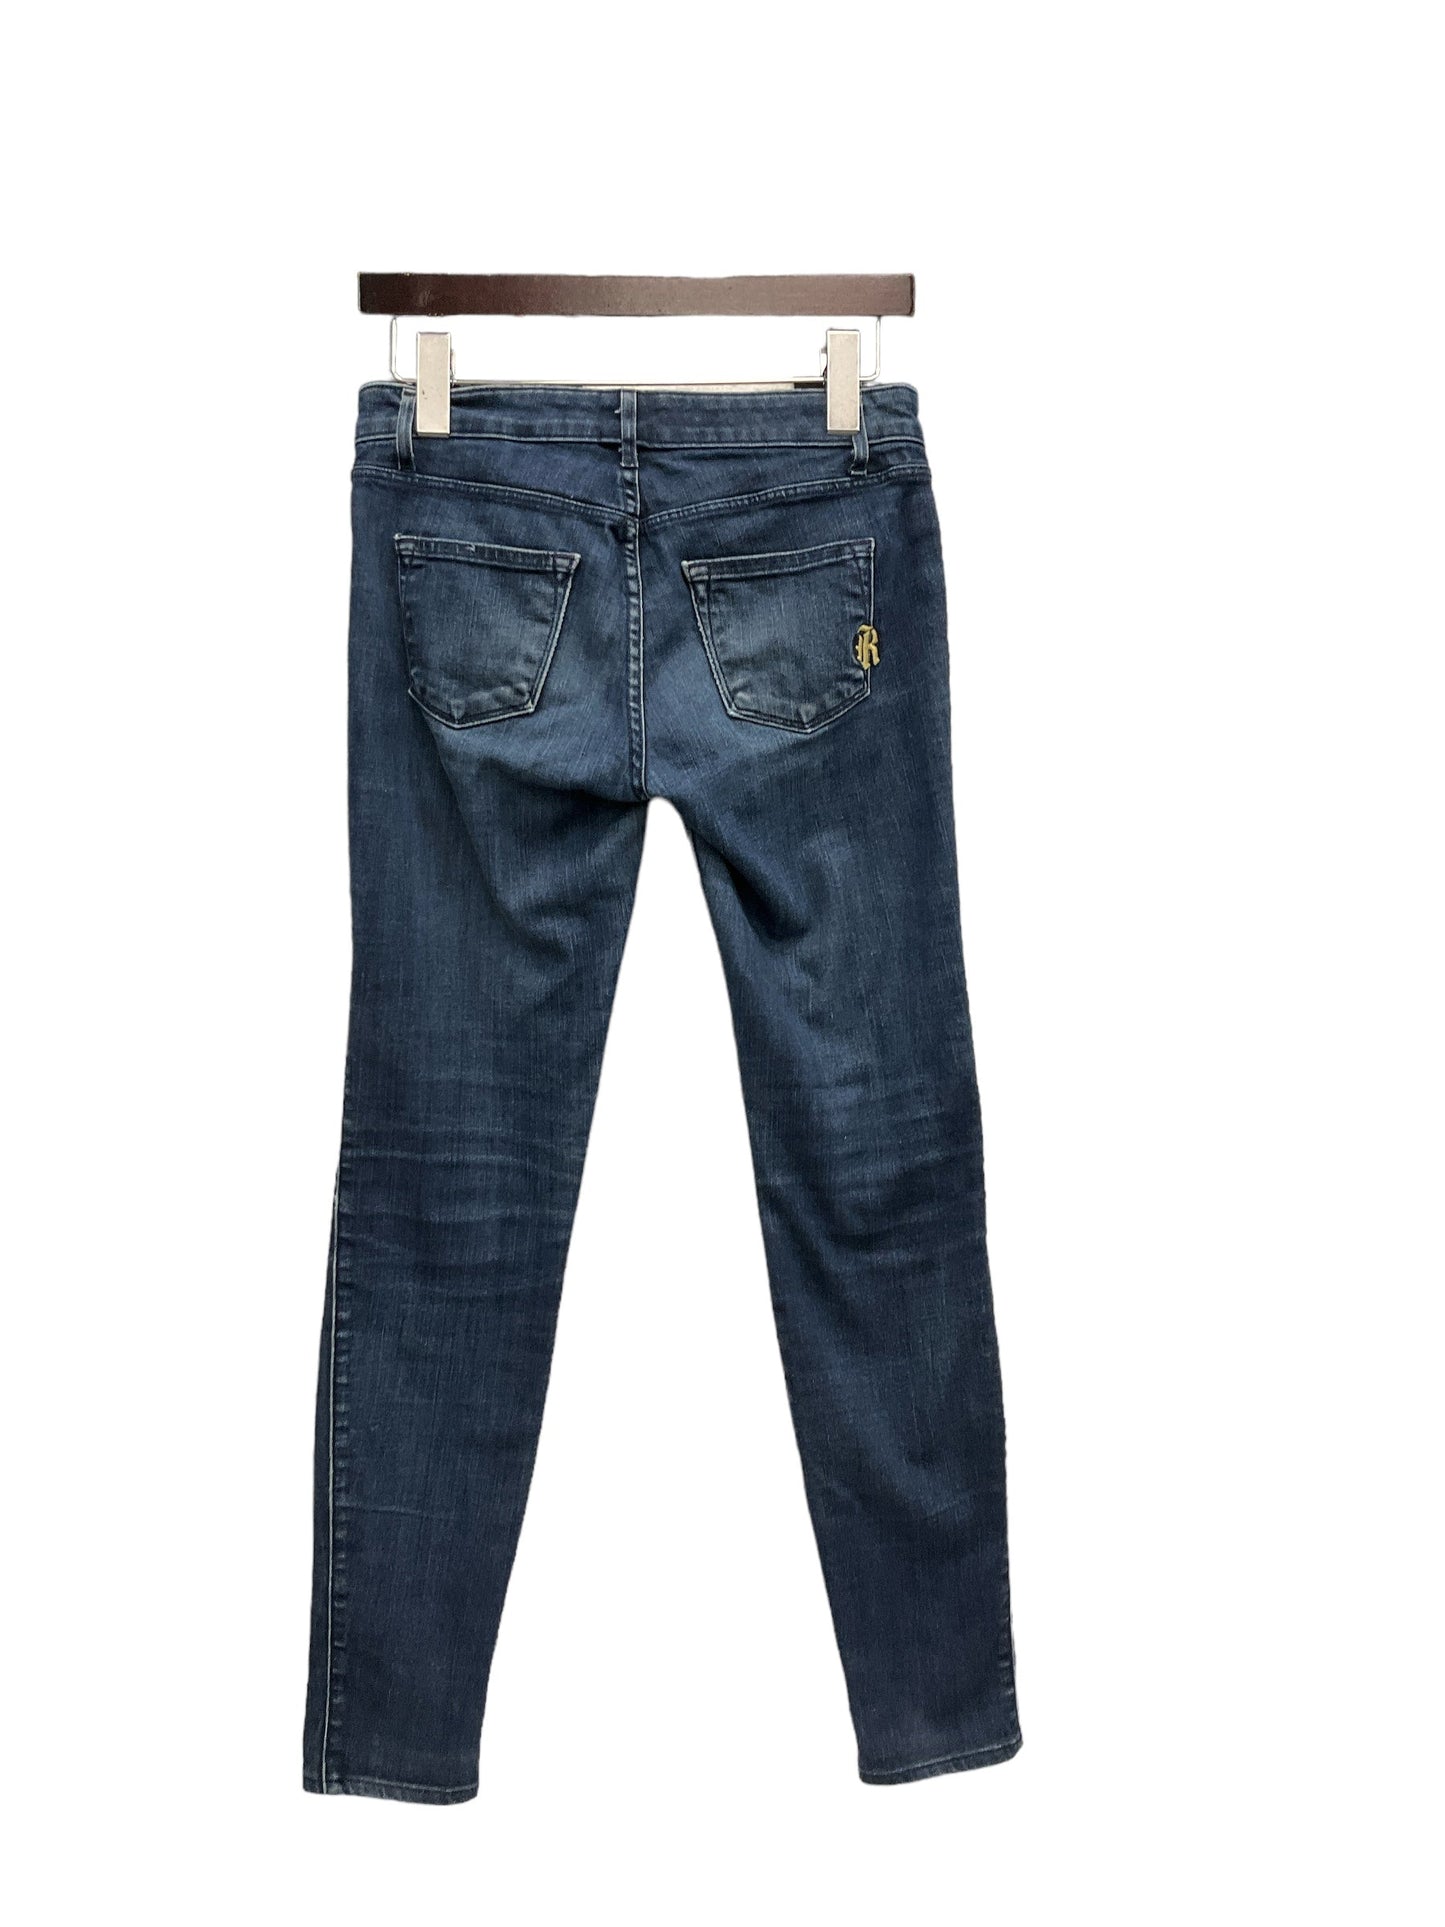 Jeans Skinny By Rich And Skinny  Size: 2.5